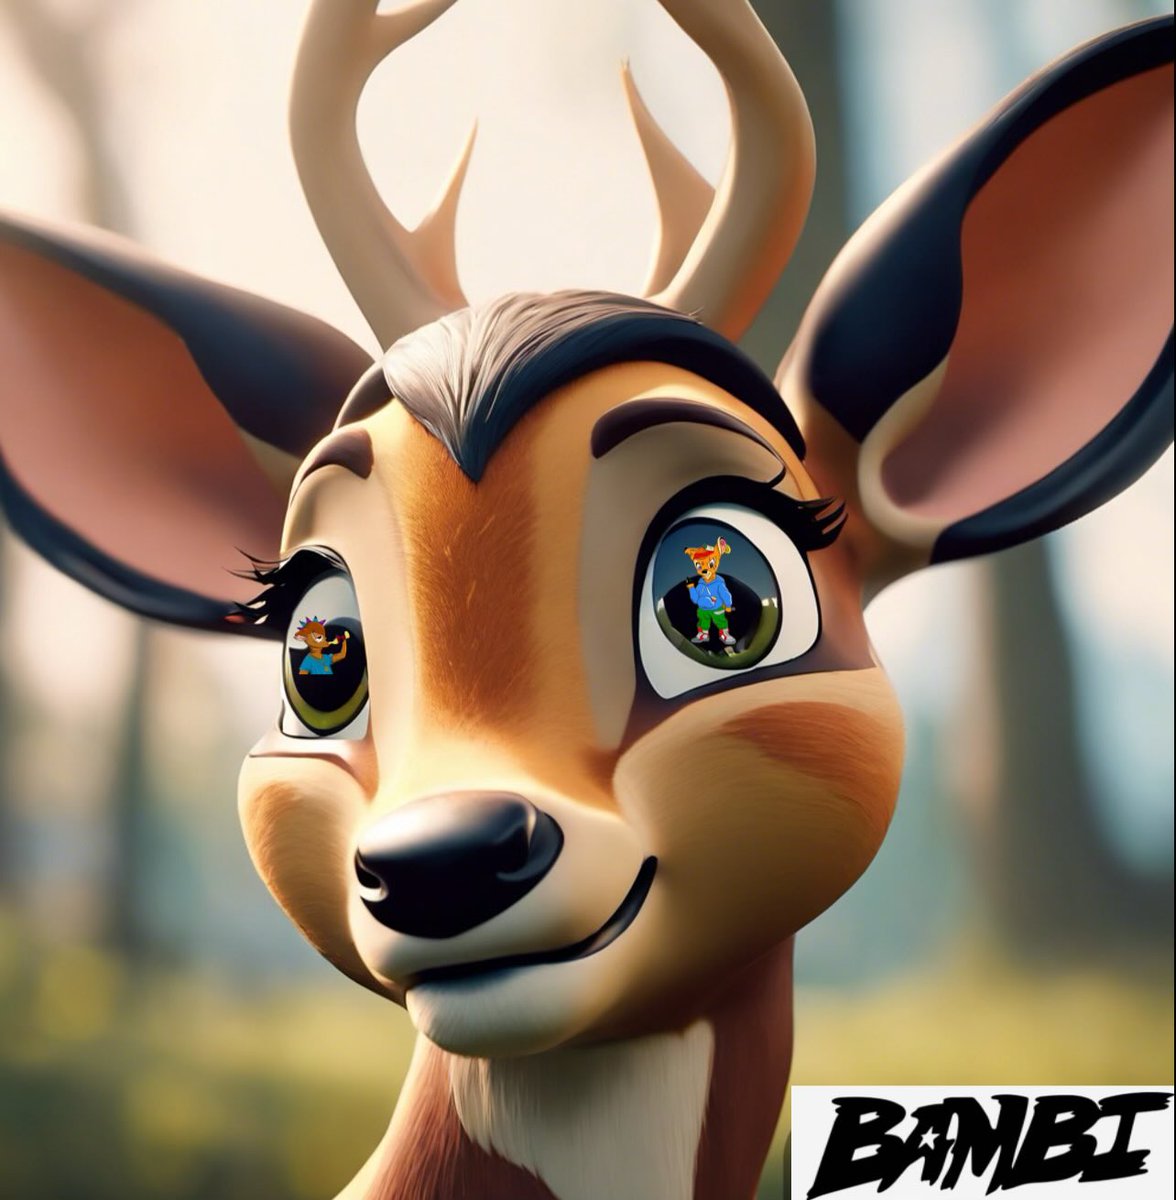 Once a carefree fawn, BAMBI's world shattered with the echoing gunshot that claimed his mother. Lost and vulnerable, he navigated the urban jungle, facing adversity that transformed him into a broken soul. Living in the harsh streets, he sought solace in the numbing embrace of